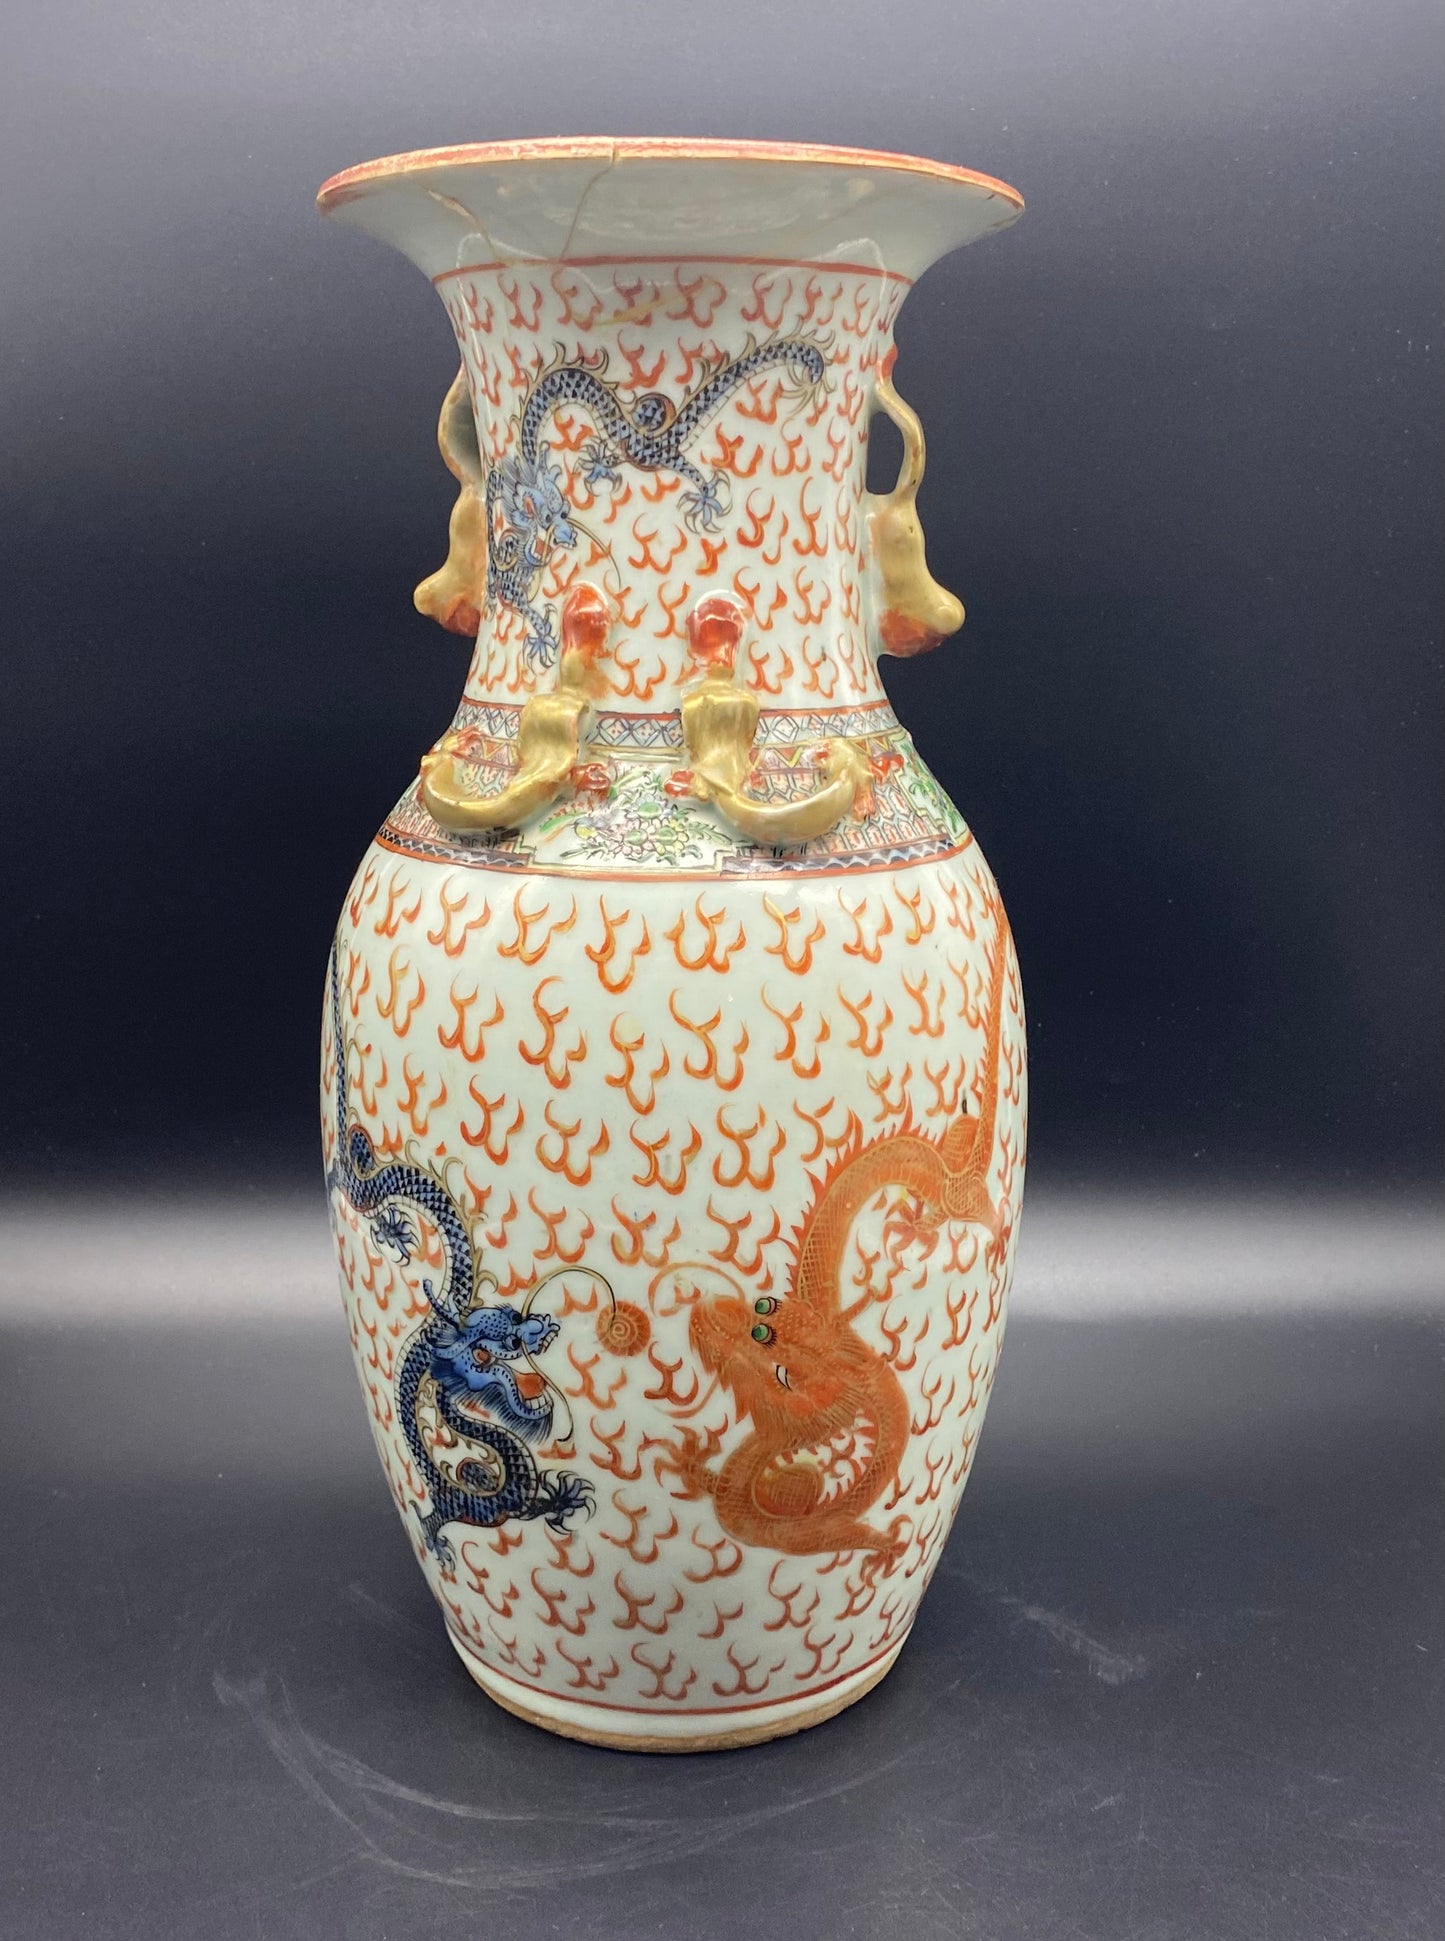 Antique Dragon Vase - The dragon is a mythical creature that has long been the most important symbol of power in China.